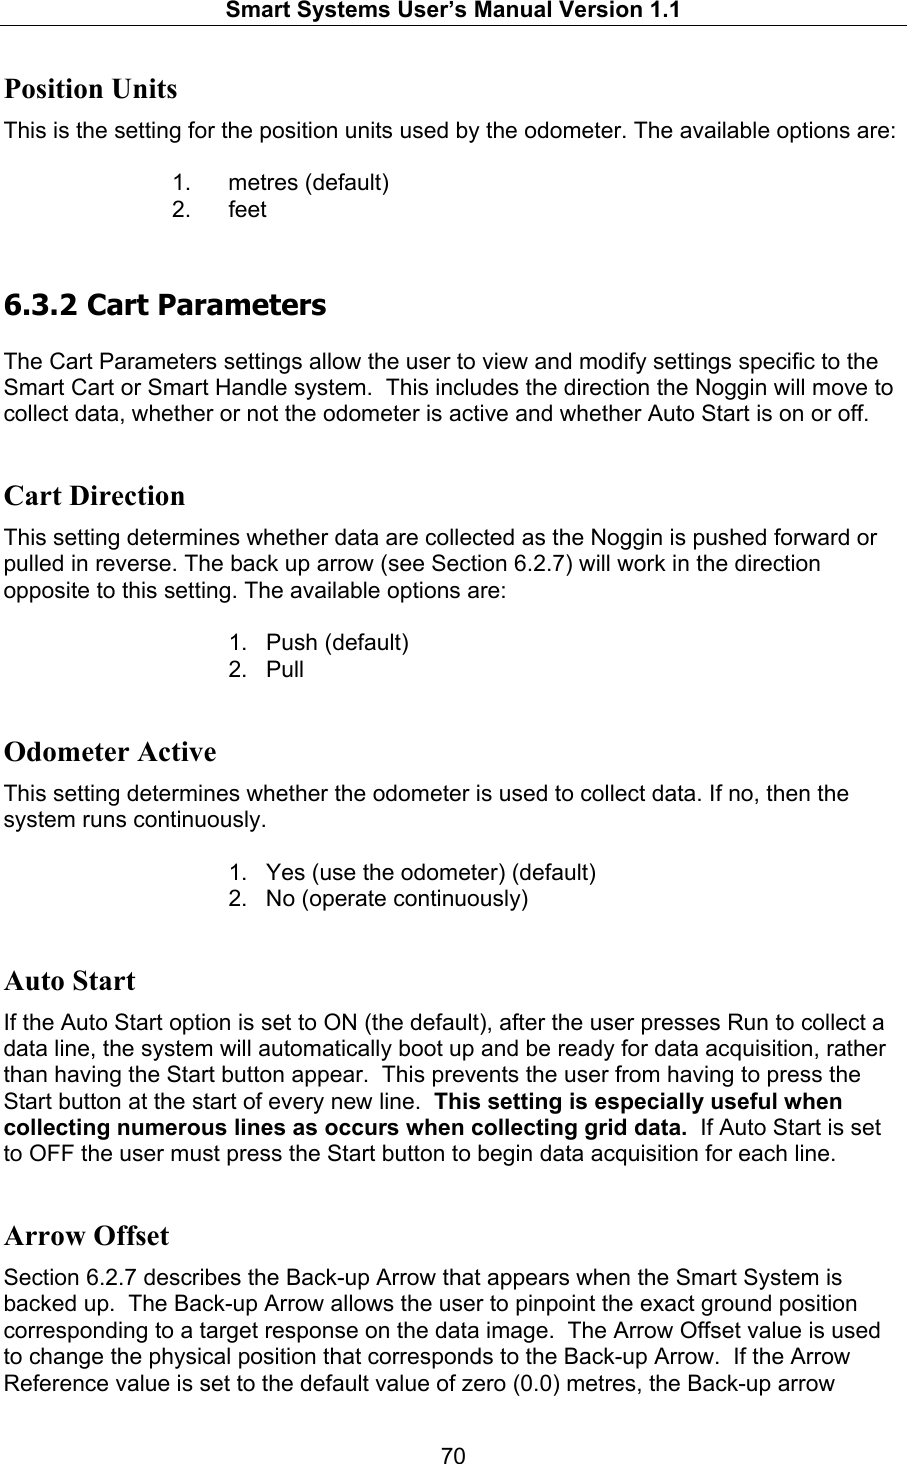   Smart Systems User’s Manual Version 1.1  70  Position Units This is the setting for the position units used by the odometer. The available options are:   1. metres (default) 2. feet 6.3.2  Cart Parameters  The Cart Parameters settings allow the user to view and modify settings specific to the Smart Cart or Smart Handle system.  This includes the direction the Noggin will move to collect data, whether or not the odometer is active and whether Auto Start is on or off.  Cart Direction This setting determines whether data are collected as the Noggin is pushed forward or pulled in reverse. The back up arrow (see Section 6.2.7) will work in the direction opposite to this setting. The available options are:  1. Push (default) 2. Pull  Odometer Active This setting determines whether the odometer is used to collect data. If no, then the system runs continuously.   1.  Yes (use the odometer) (default) 2.  No (operate continuously)  Auto Start If the Auto Start option is set to ON (the default), after the user presses Run to collect a data line, the system will automatically boot up and be ready for data acquisition, rather than having the Start button appear.  This prevents the user from having to press the Start button at the start of every new line.  This setting is especially useful when collecting numerous lines as occurs when collecting grid data.  If Auto Start is set to OFF the user must press the Start button to begin data acquisition for each line.  Arrow Offset Section 6.2.7 describes the Back-up Arrow that appears when the Smart System is backed up.  The Back-up Arrow allows the user to pinpoint the exact ground position corresponding to a target response on the data image.  The Arrow Offset value is used to change the physical position that corresponds to the Back-up Arrow.  If the Arrow Reference value is set to the default value of zero (0.0) metres, the Back-up arrow 